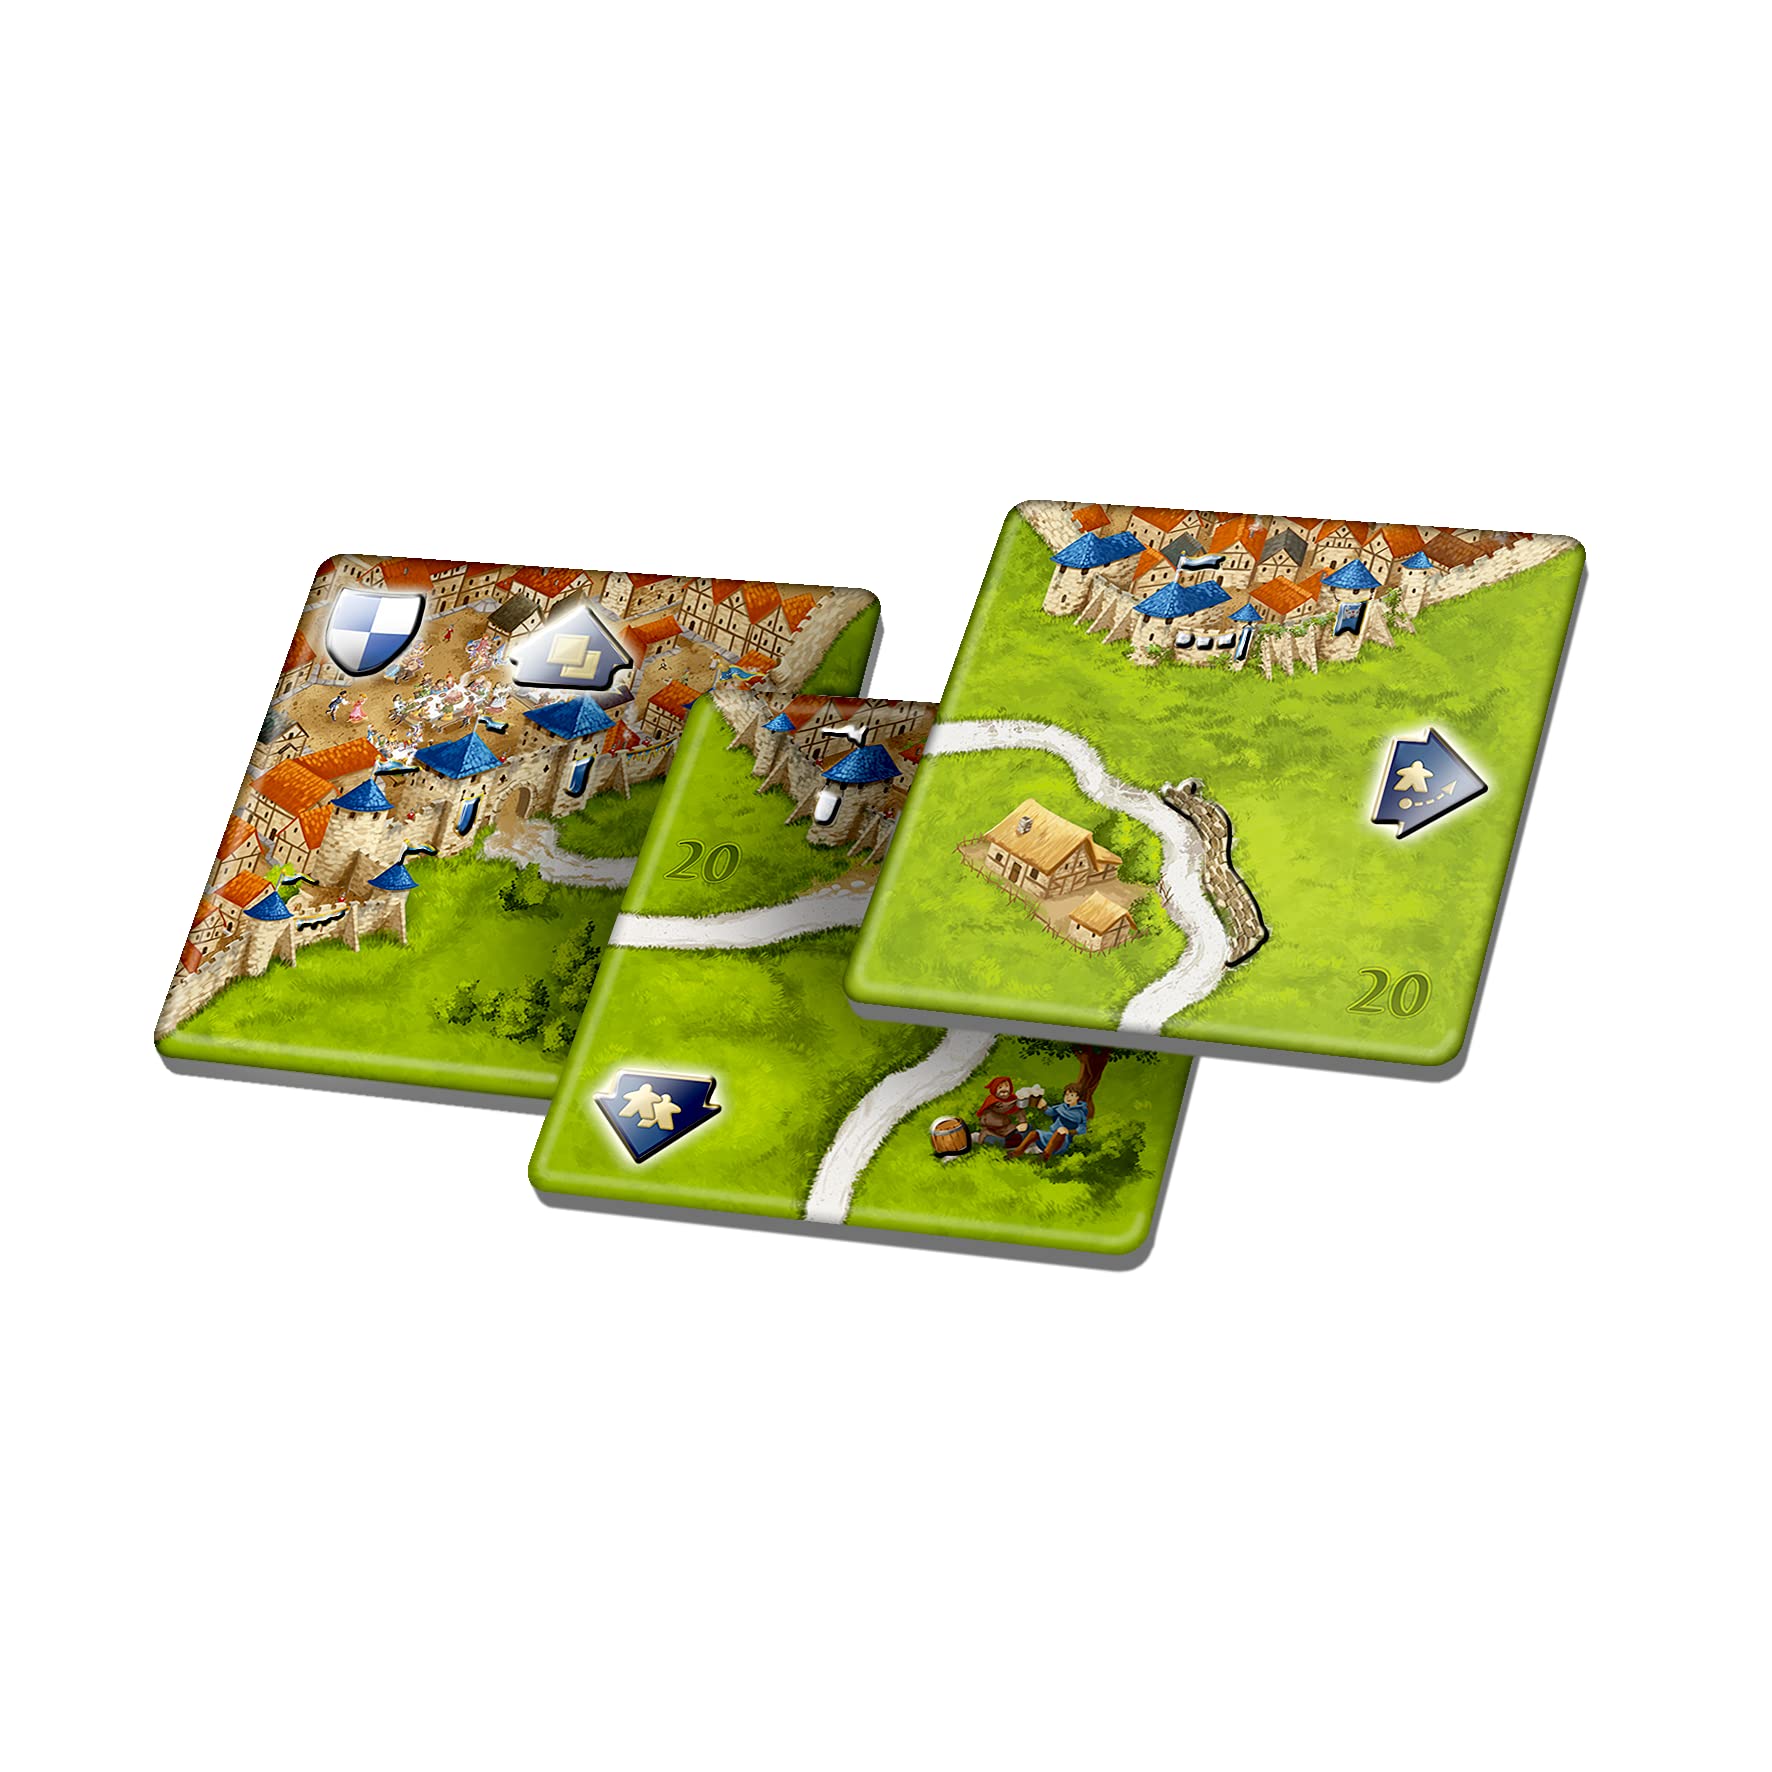 Carcassonne 20th Anniversary Edition| Family Board Game for Adults and Kids | Strategy /Adventure Game | Ages 7+ | 2-5 Players | Avg. Playtime 30-45 Minutes | Made by Z-Man Games